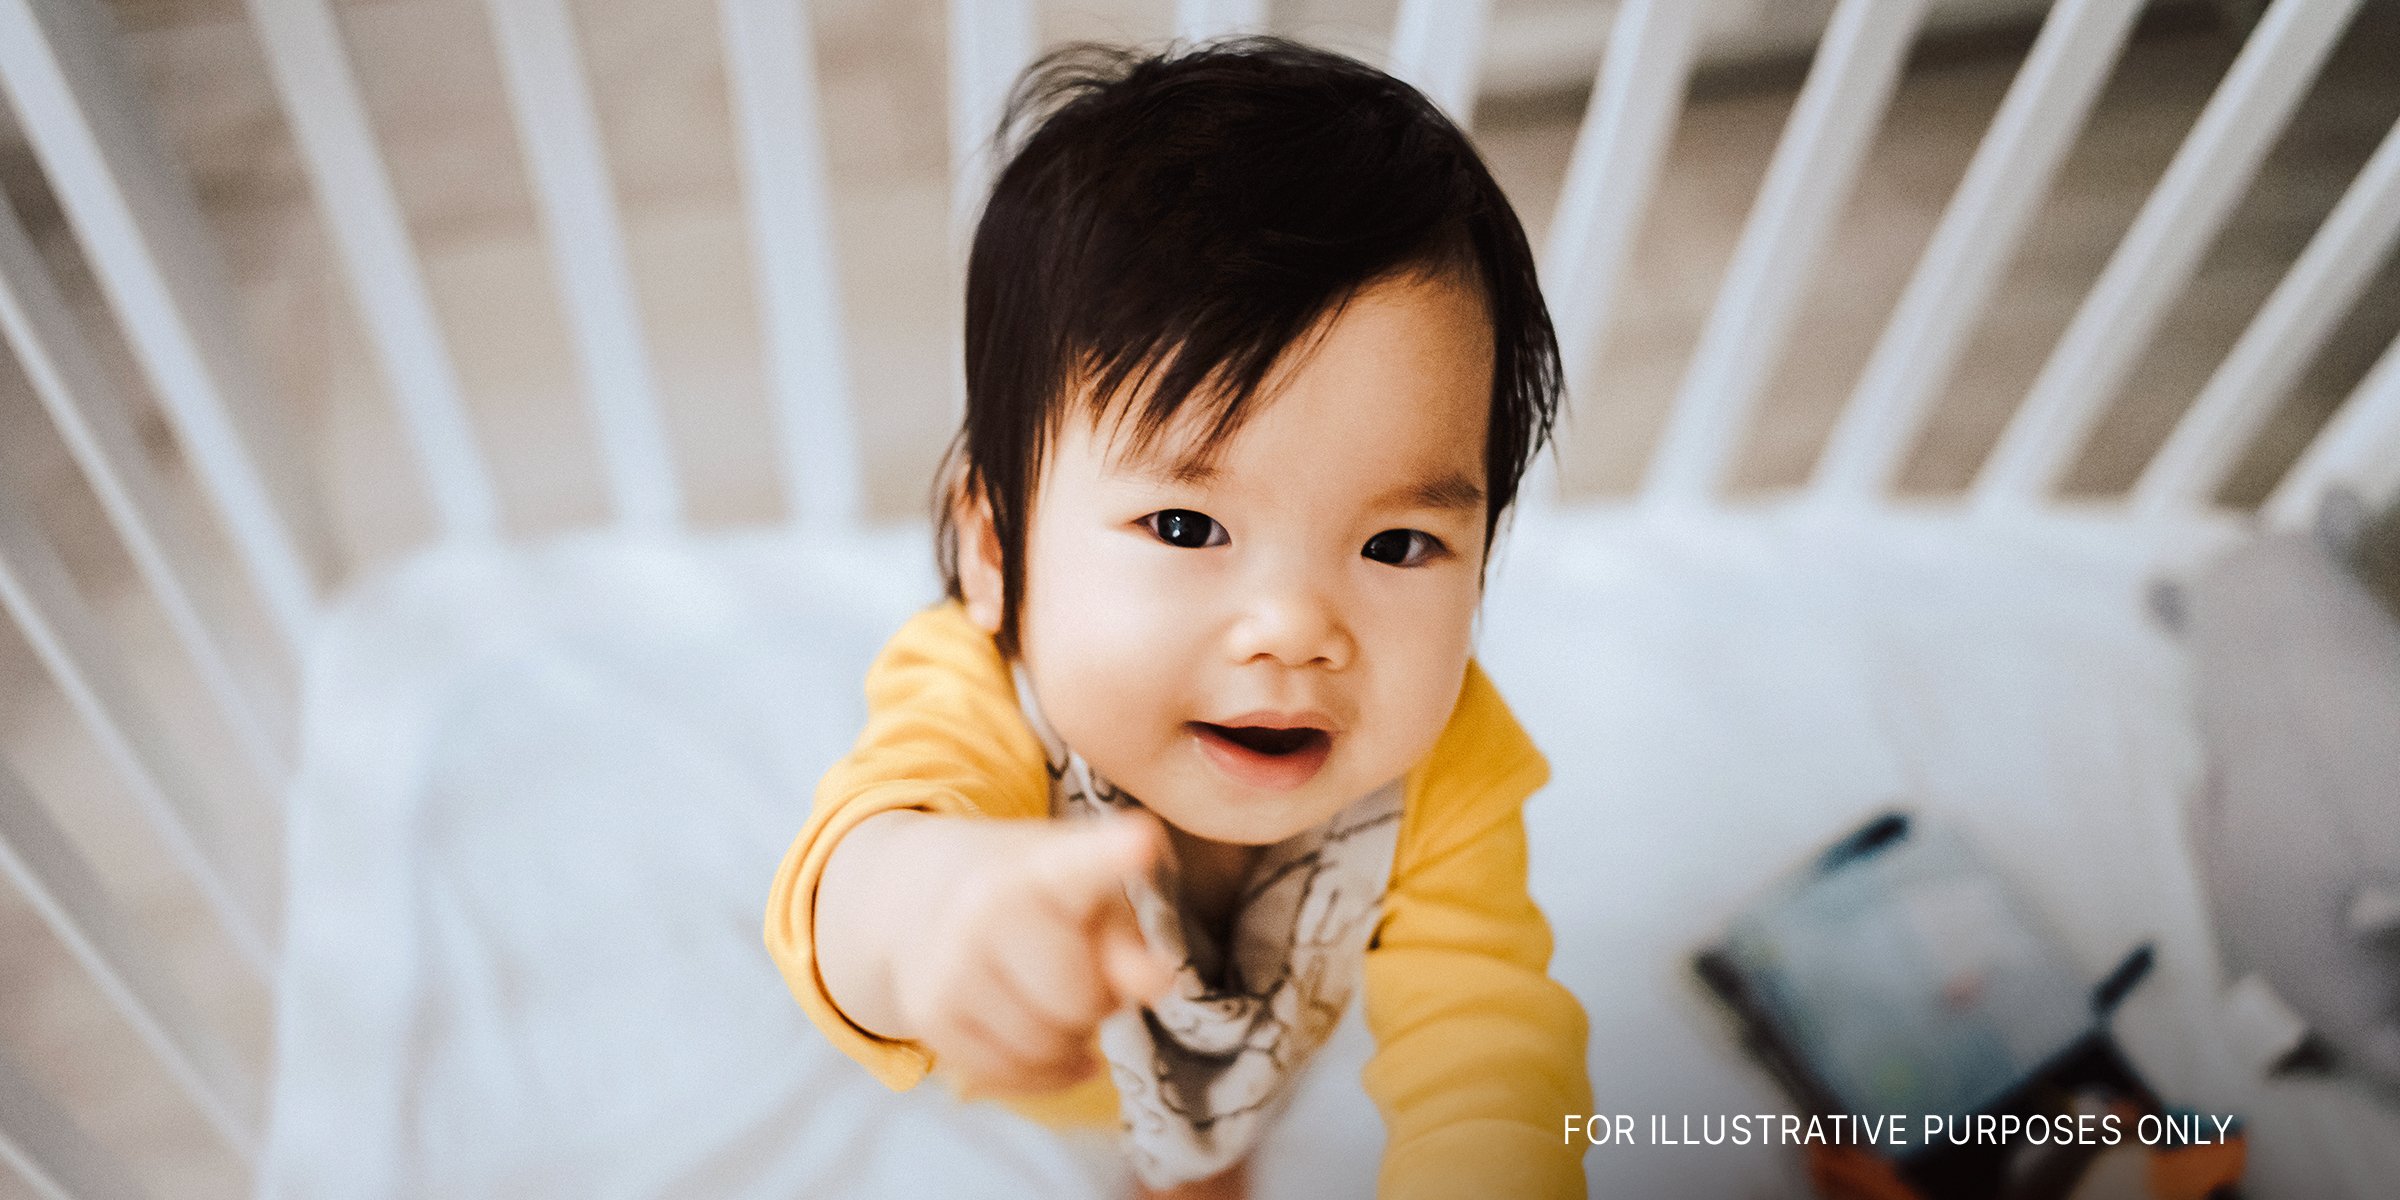 An Asian baby looking at the camera | Source: Getty Images